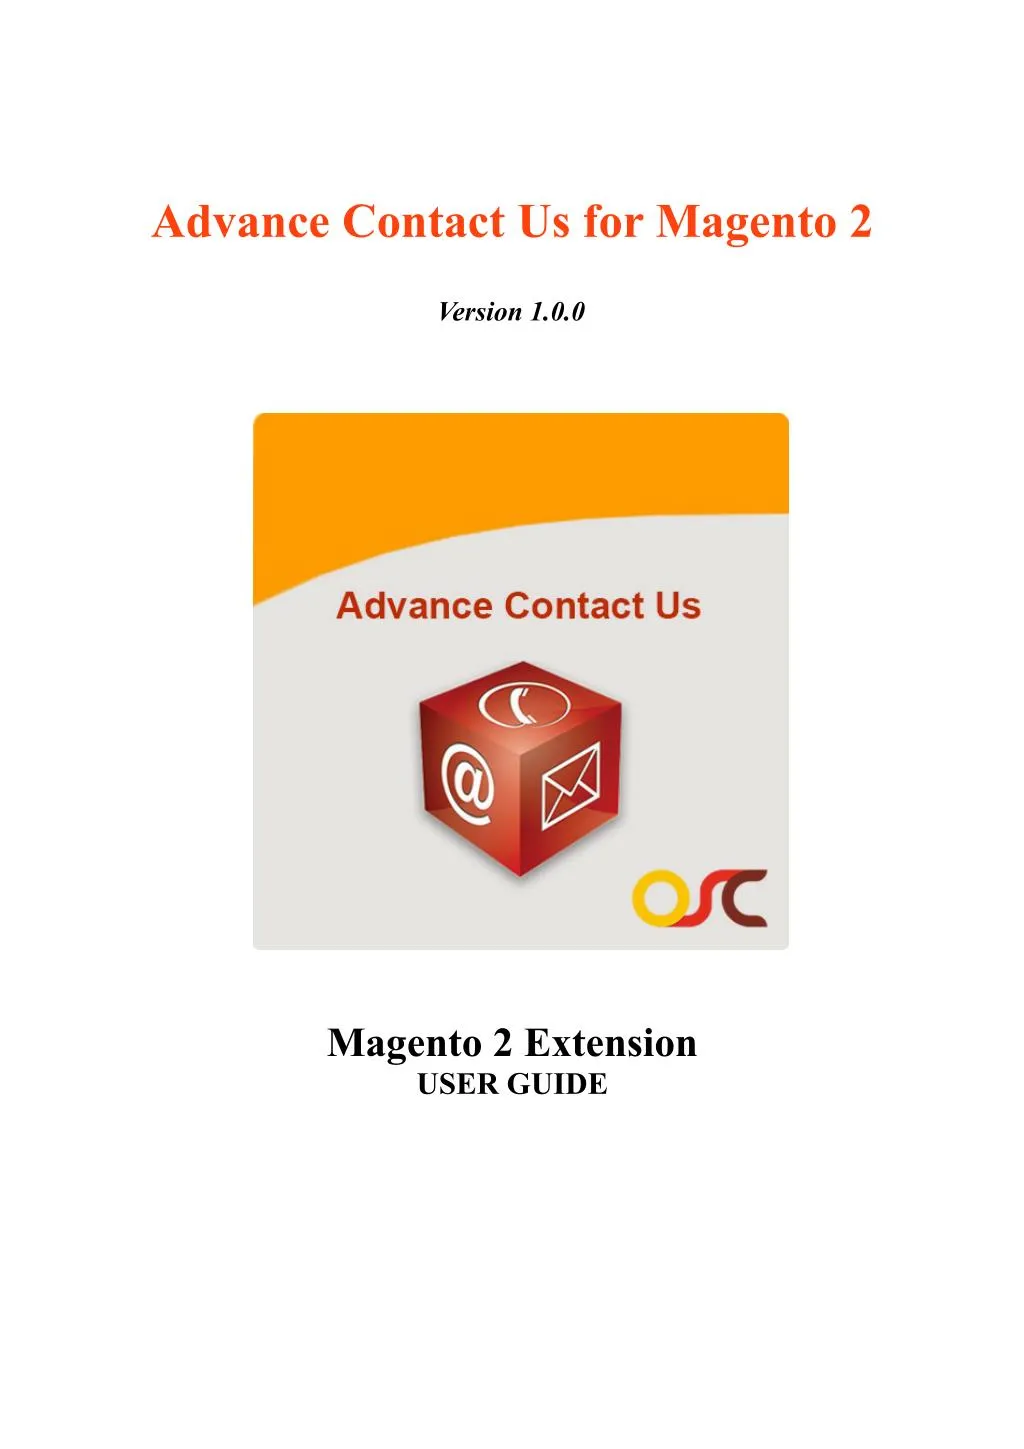 advance contact us for magento 2